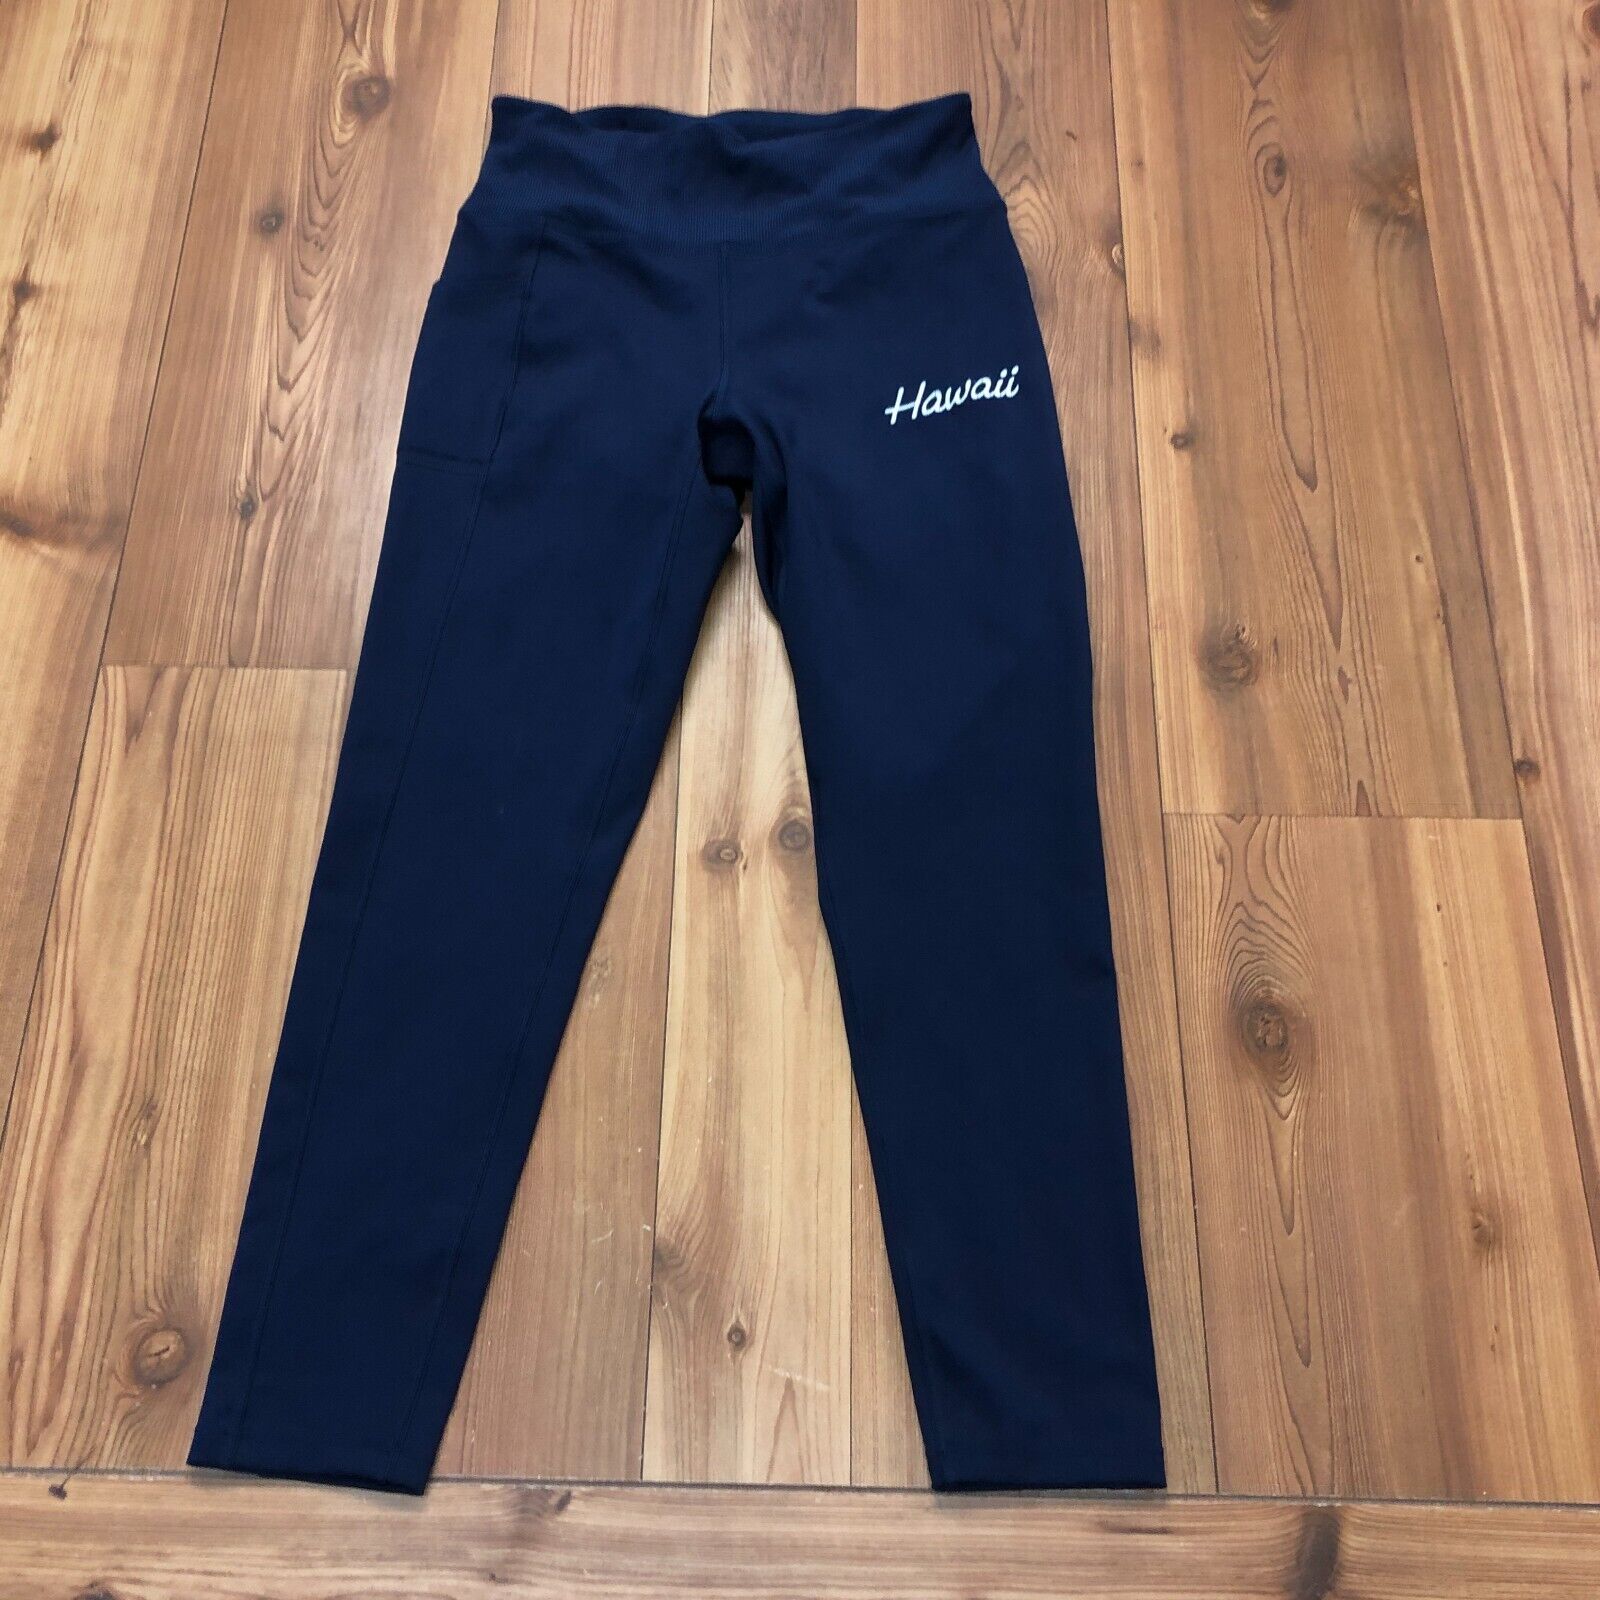 Under Armour Navy Blue Hawaii Fitted Heat Gear Joggers Pants Women Size M